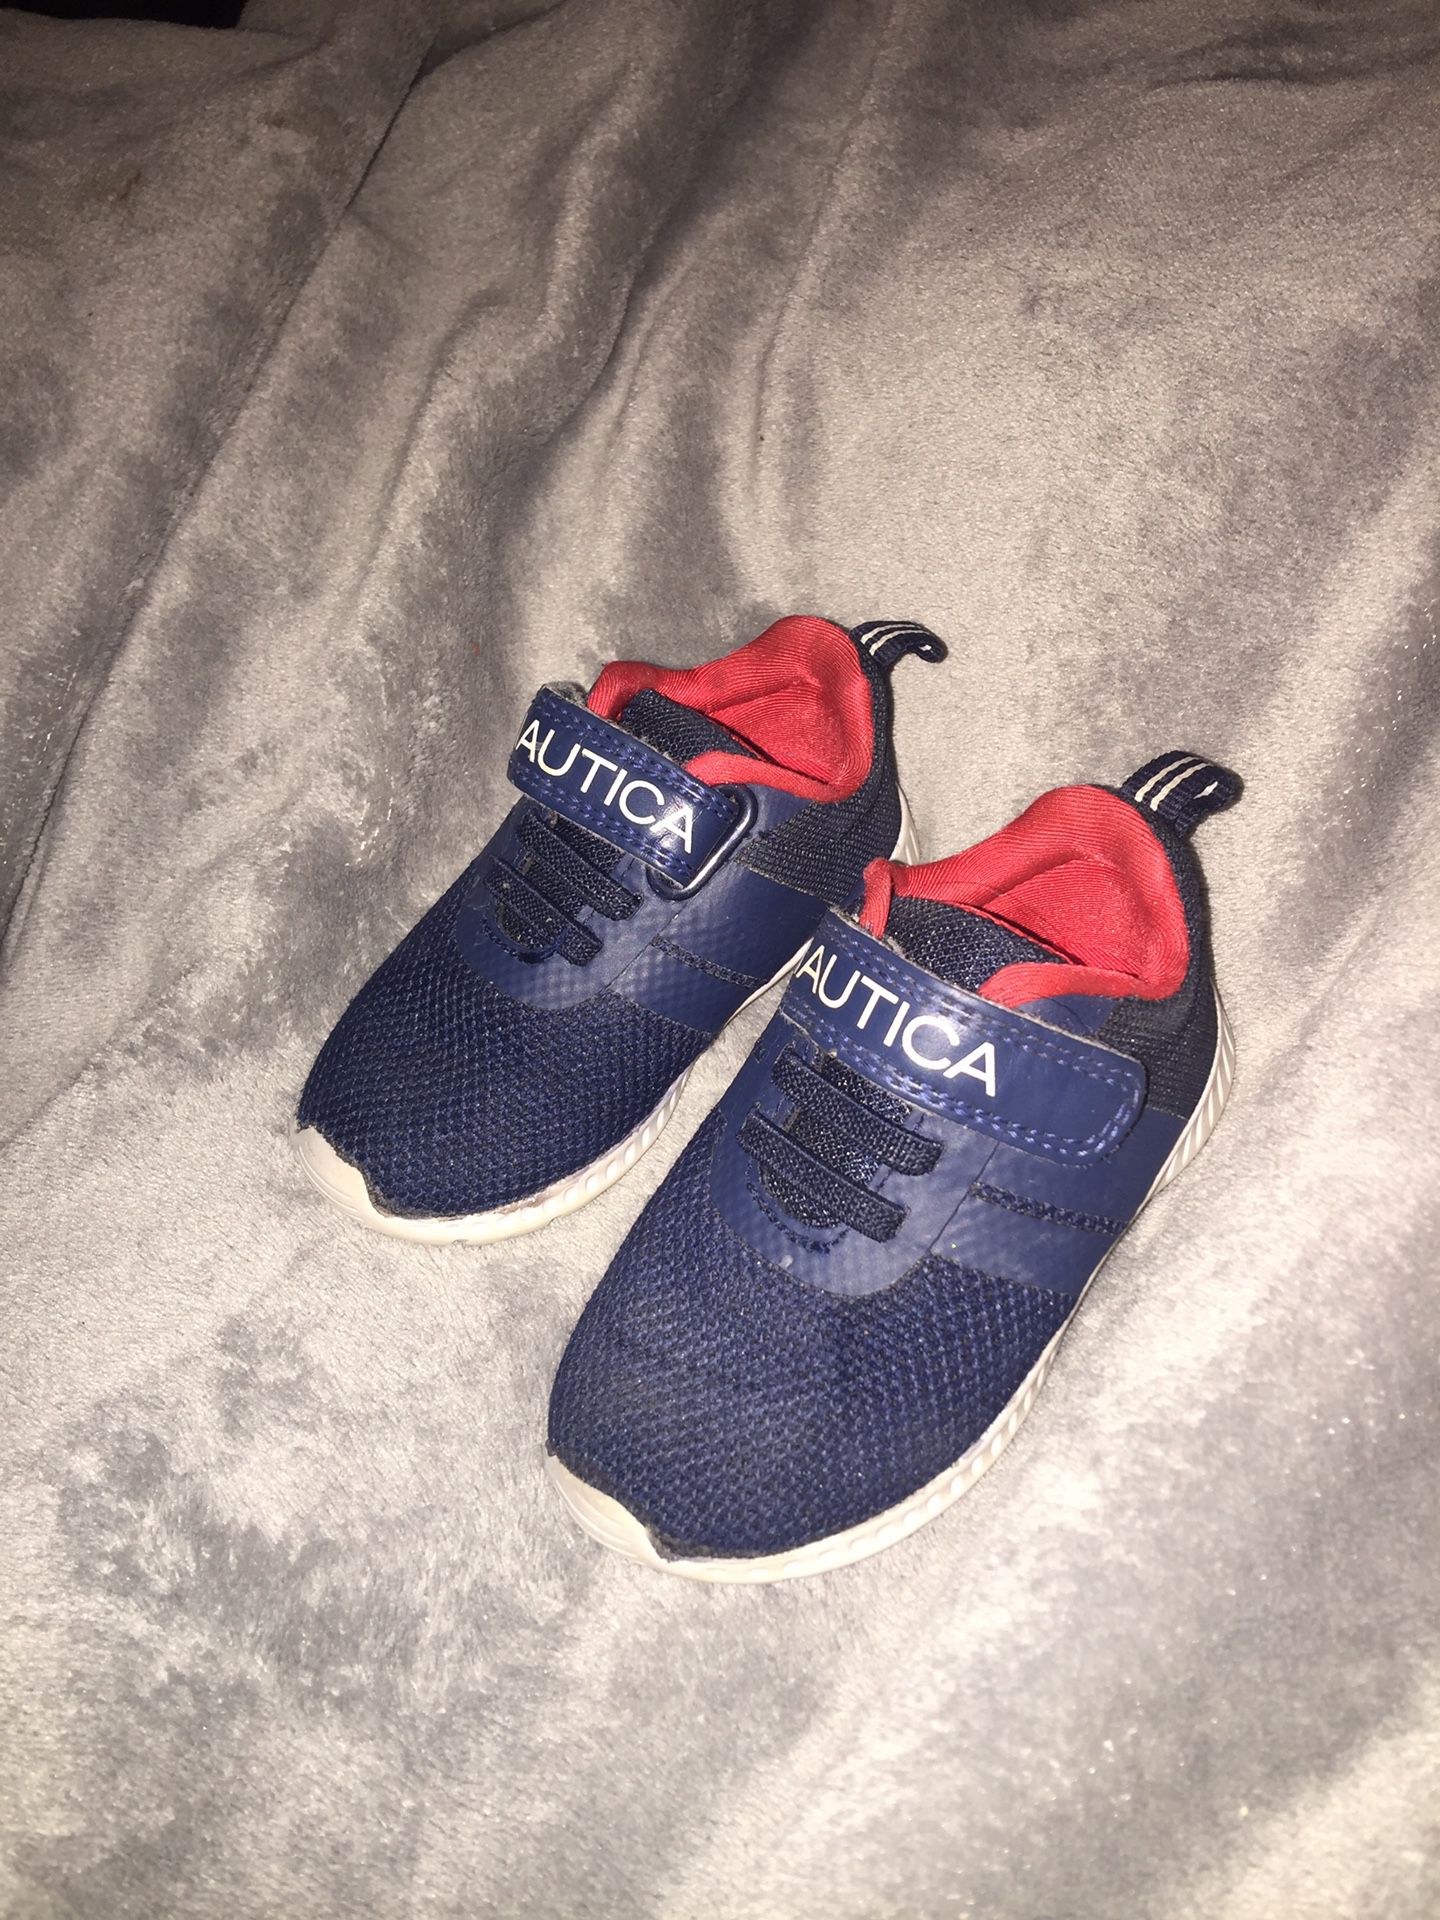 toddler shoes size 5